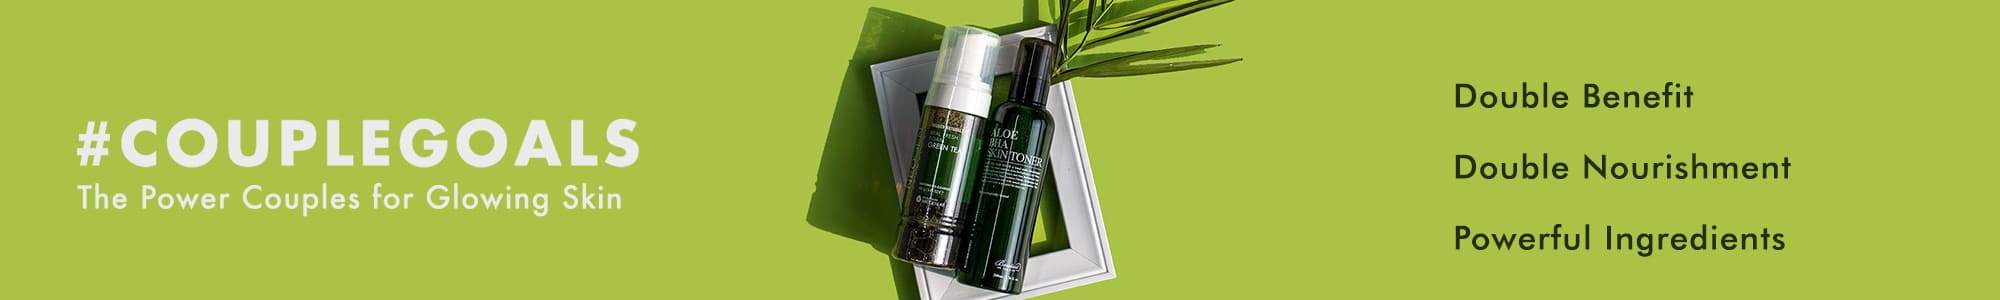 Power Couple - Skincare That Works Best Together